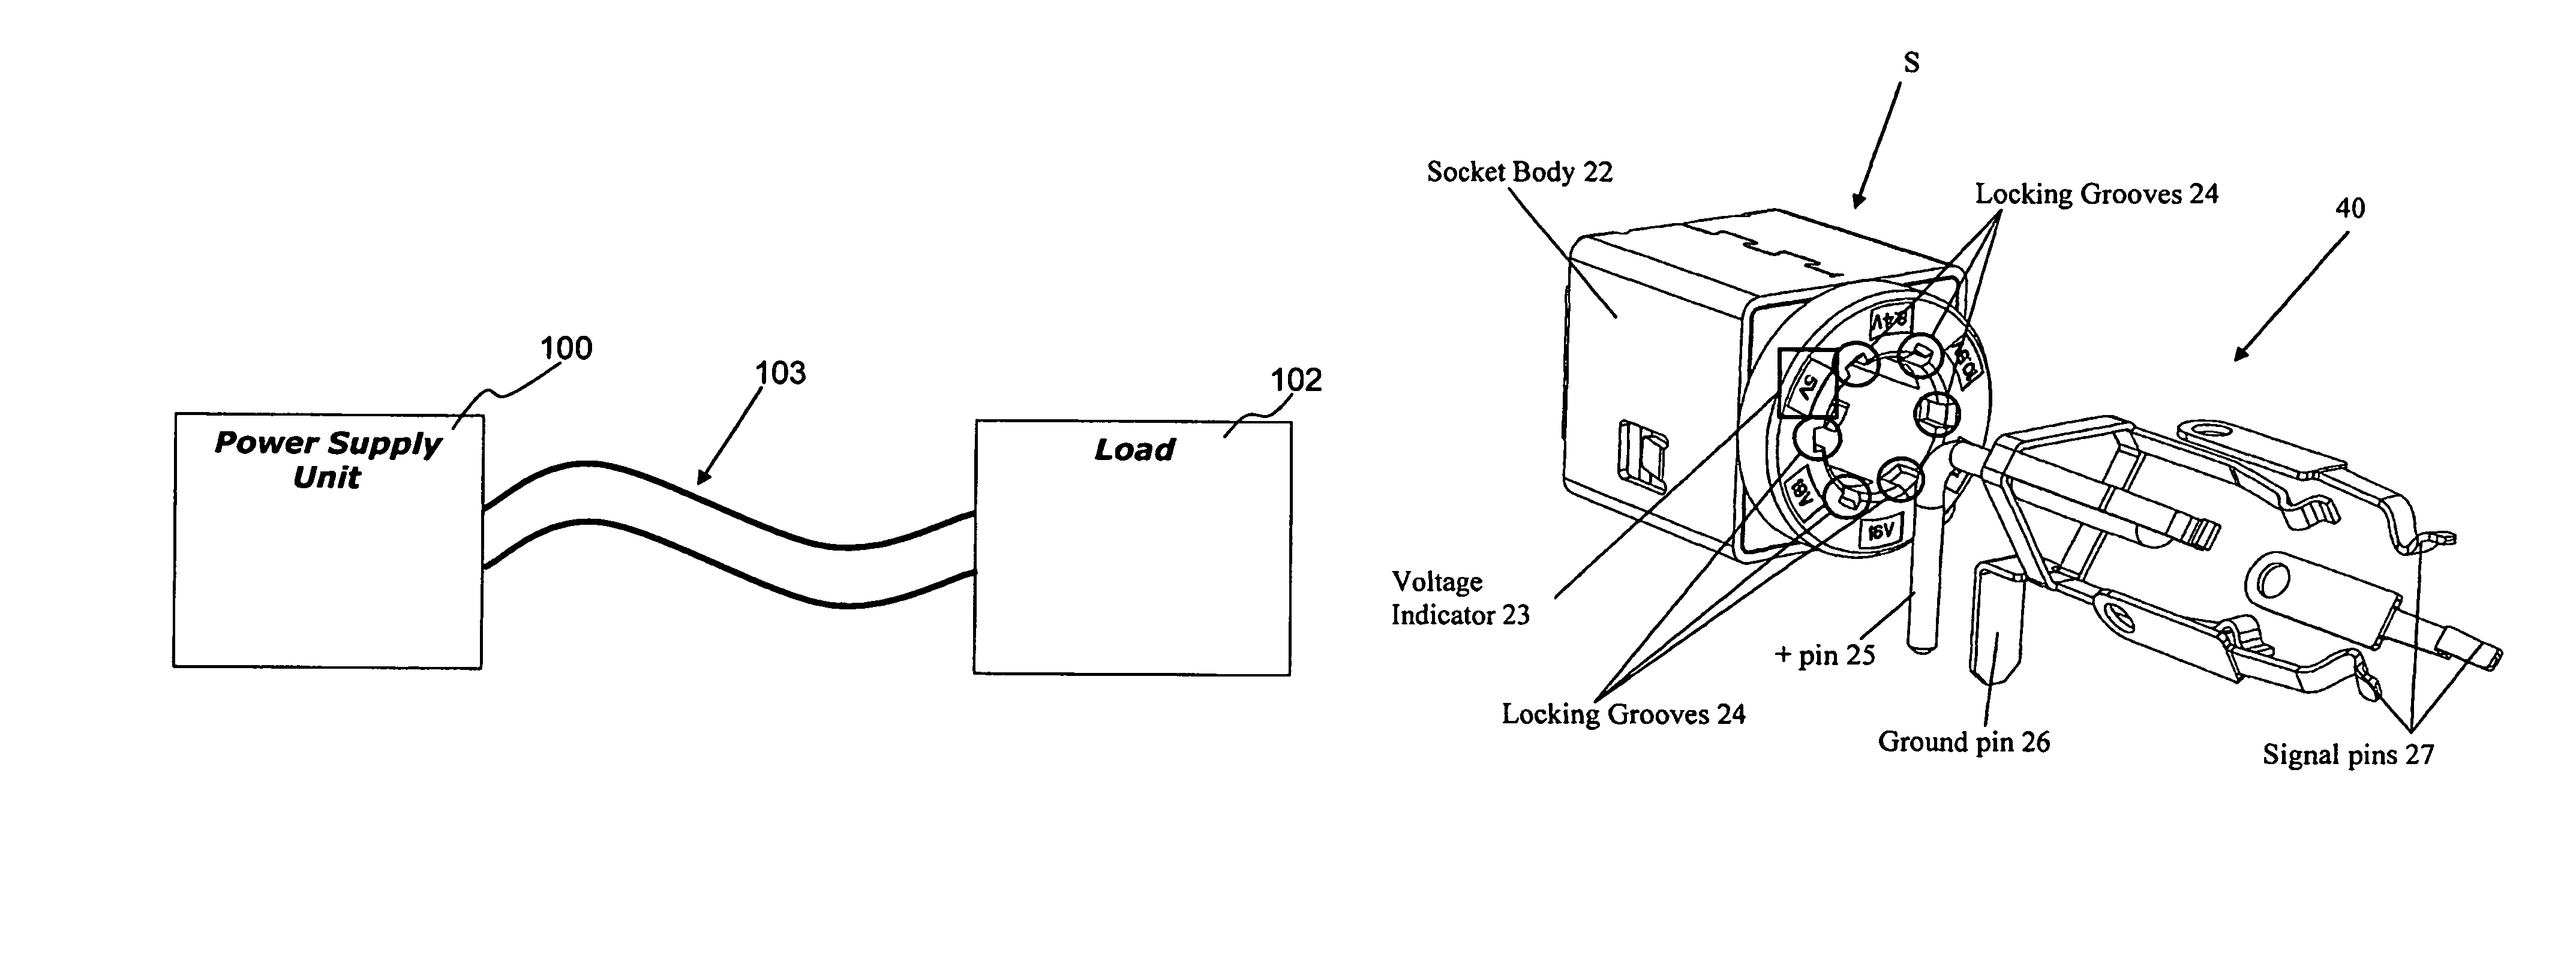 Plug movable to a plurality of positions depending upon characteristics of a load device